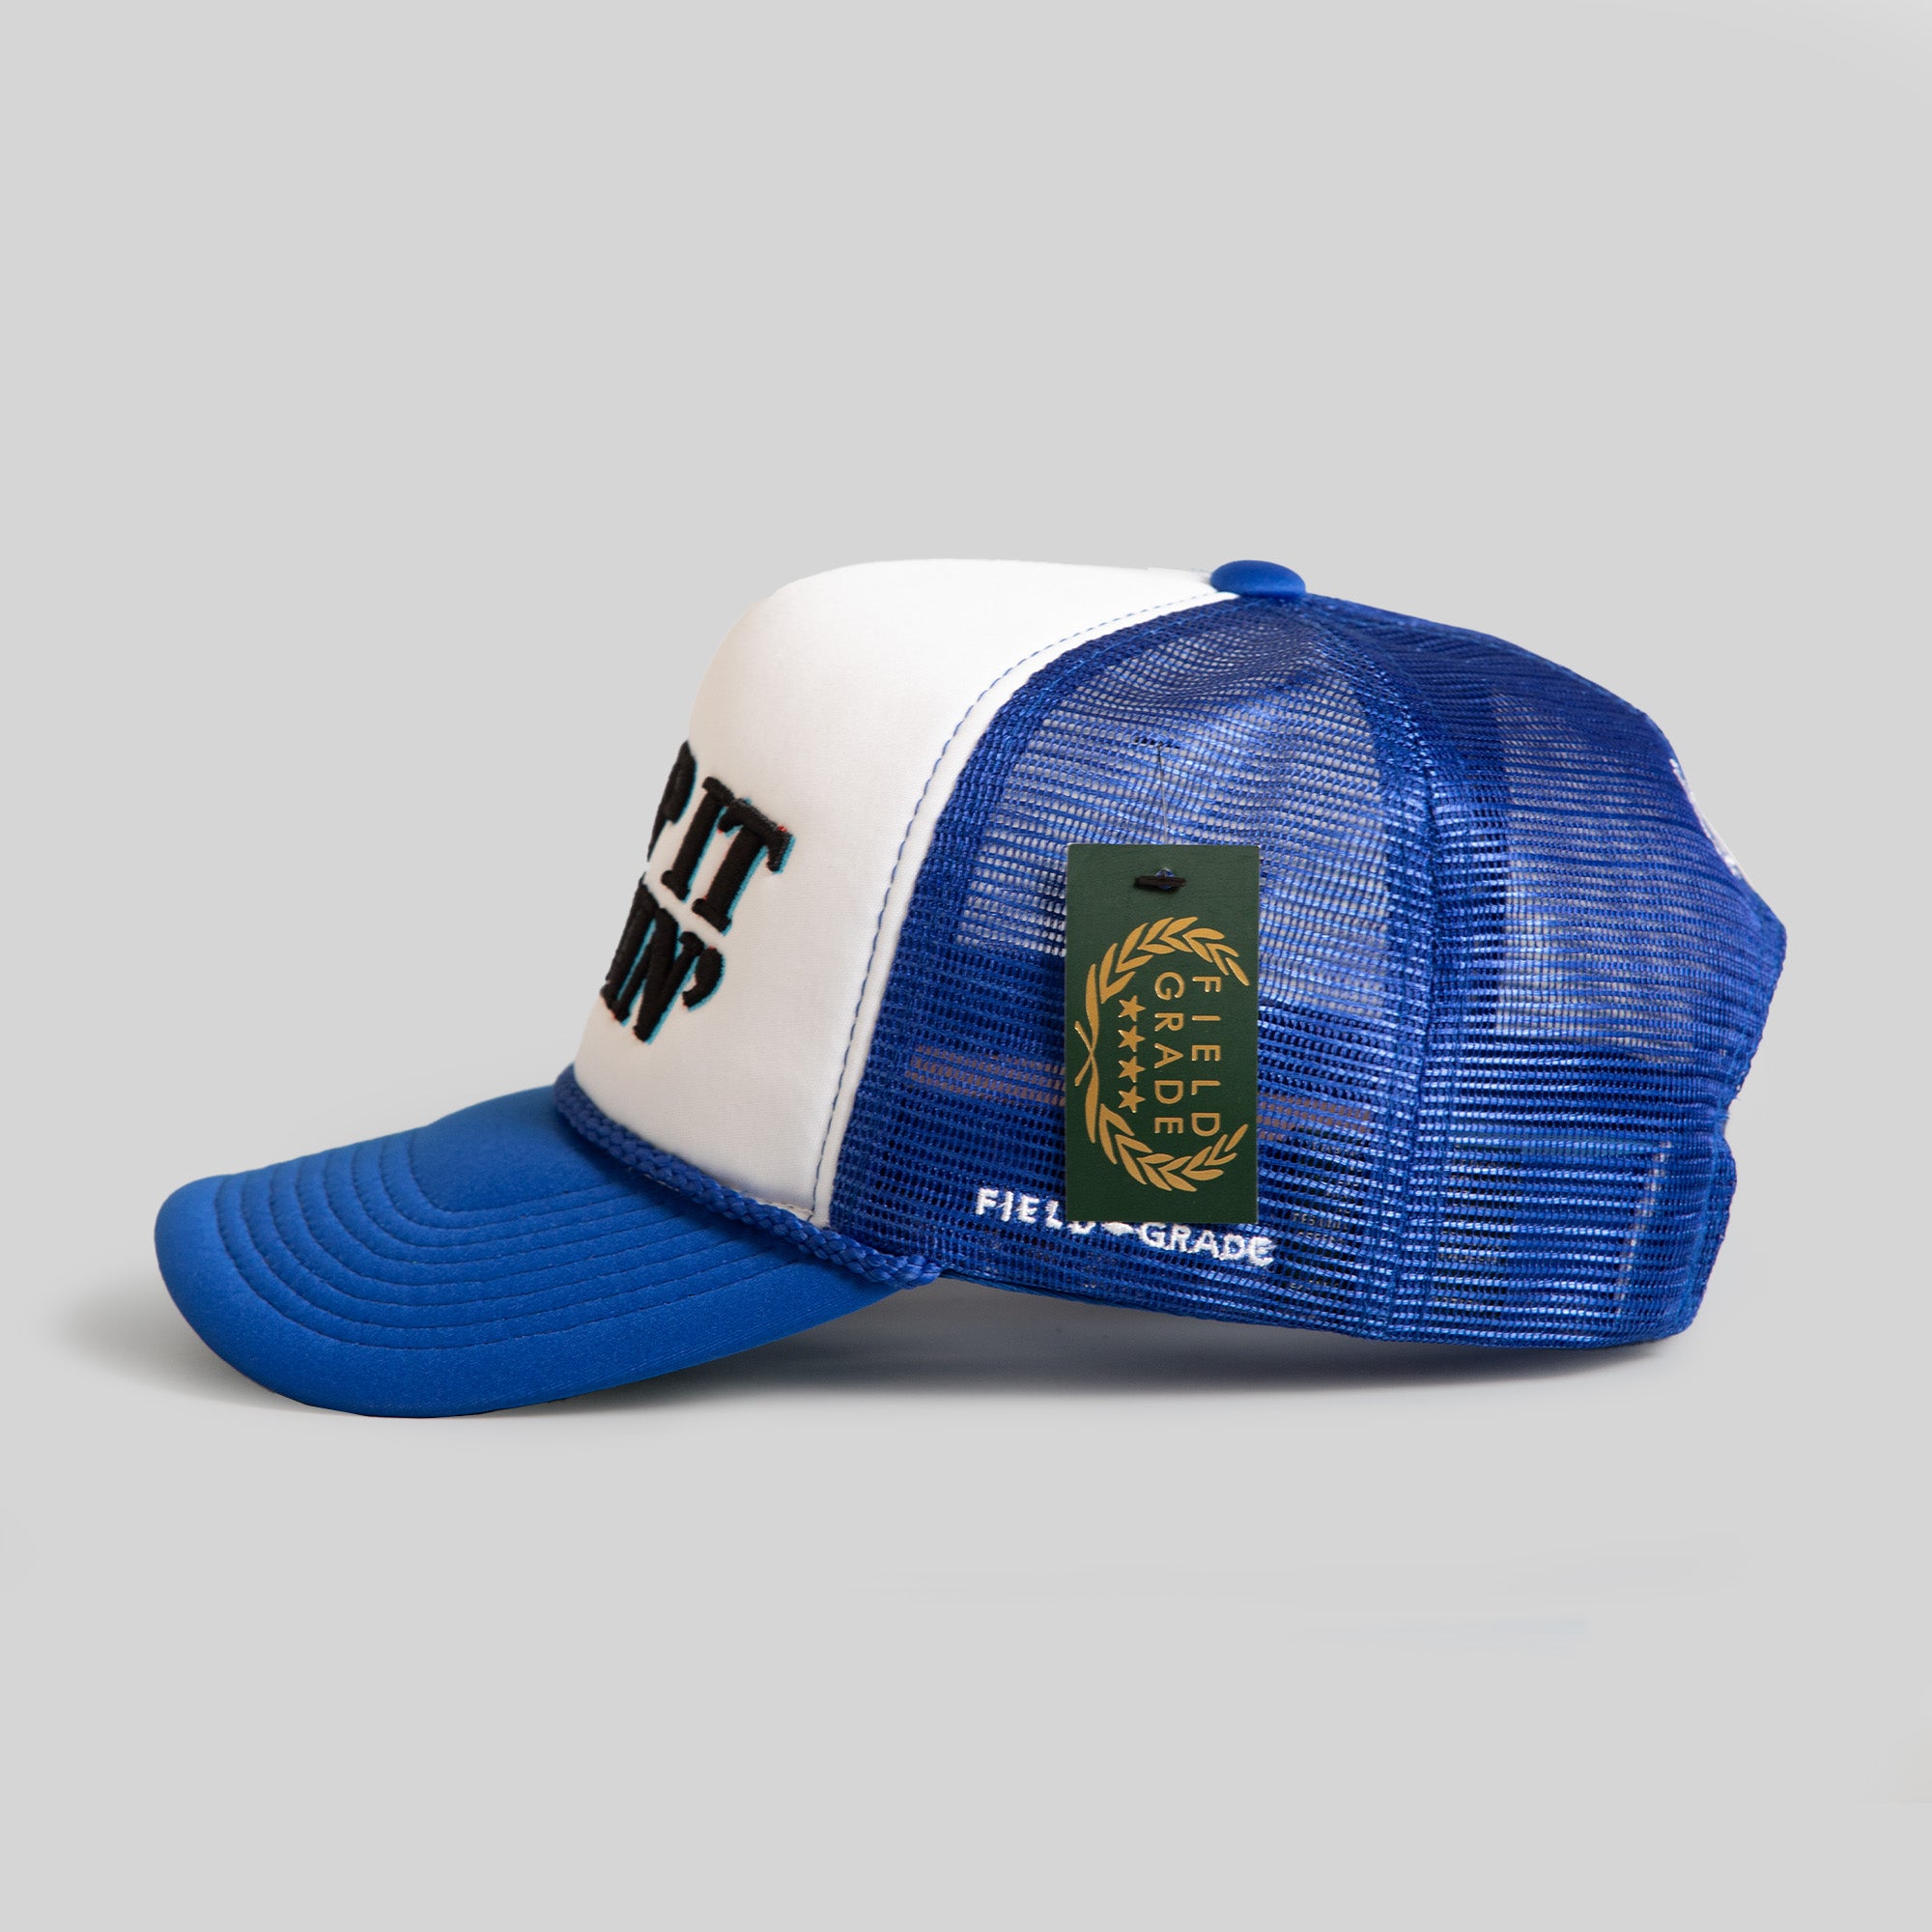 KEEP IT MOVIN' WHITE GAME ROYAL TRUCKER HAT